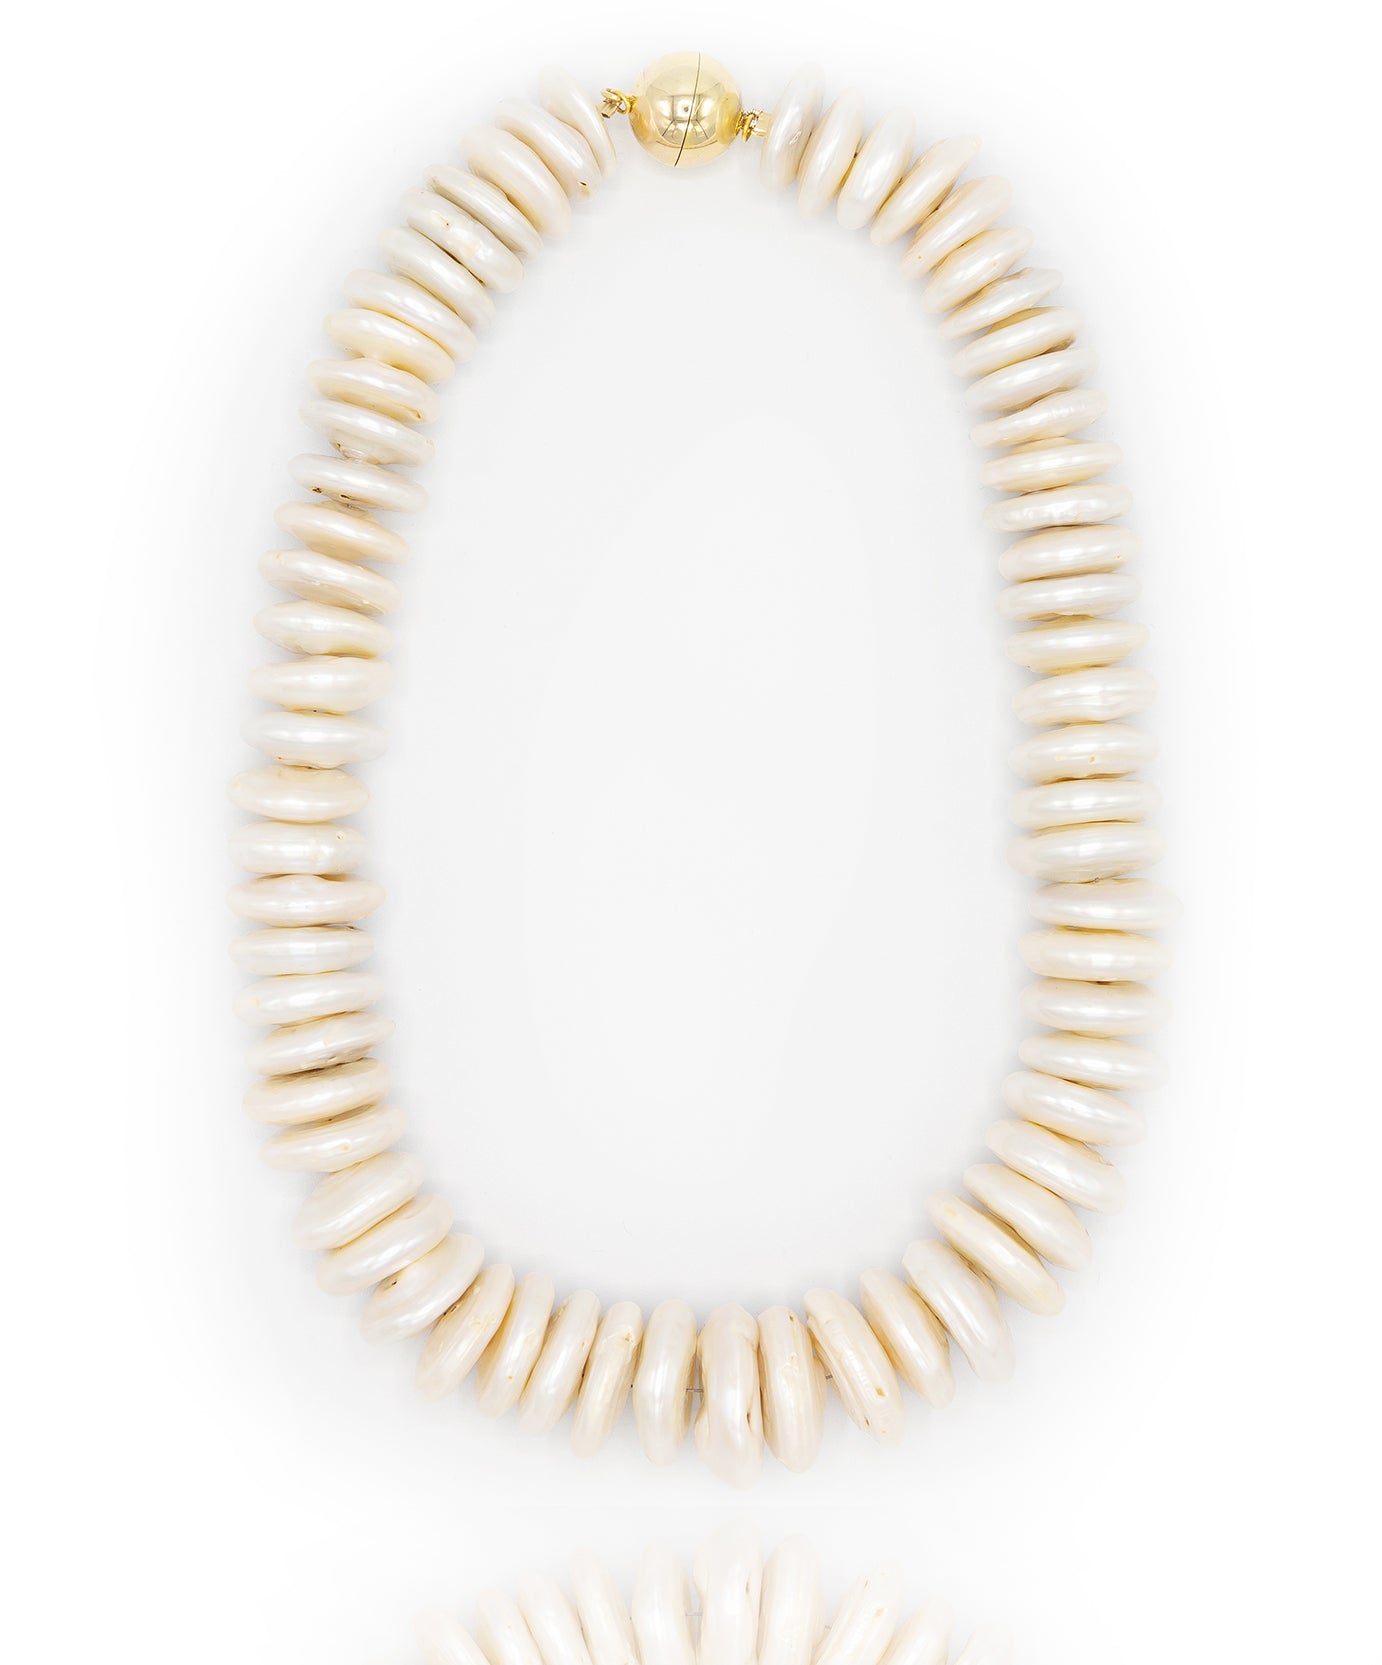 necklace made of rare shell pearls and magnetic goldplated silver clasp.